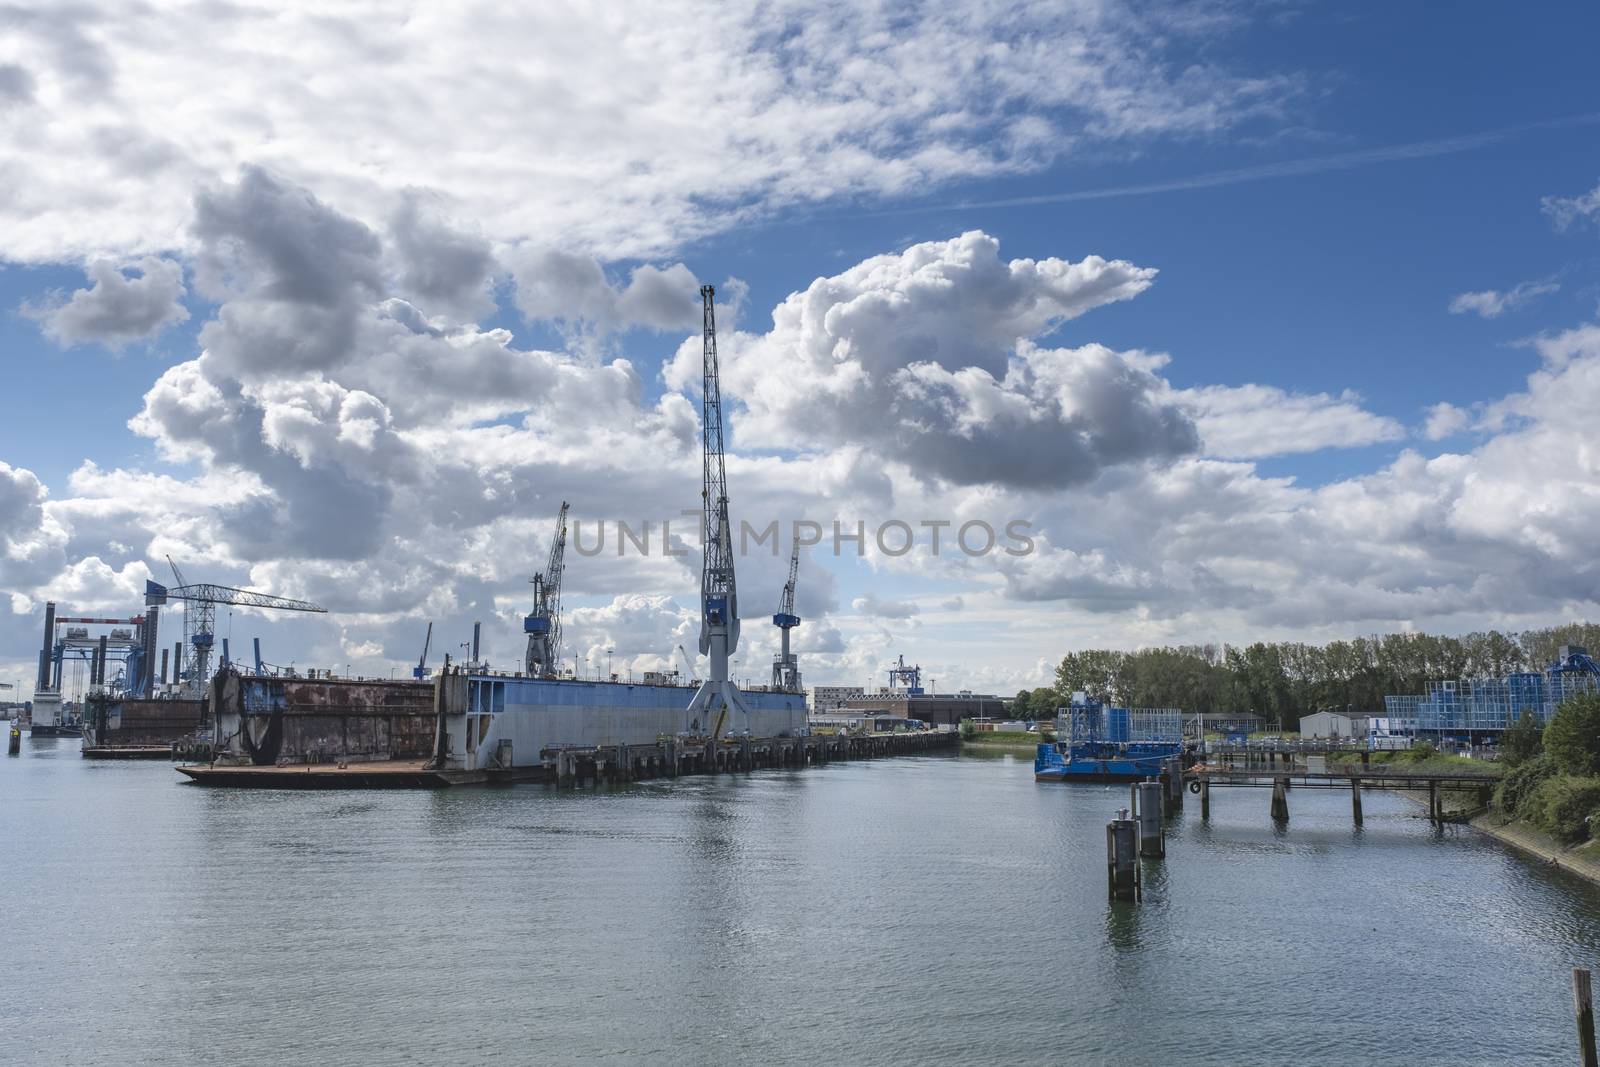 Harbor with large cranes and containers in Rotterdam, Holland by Tjeerdkruse